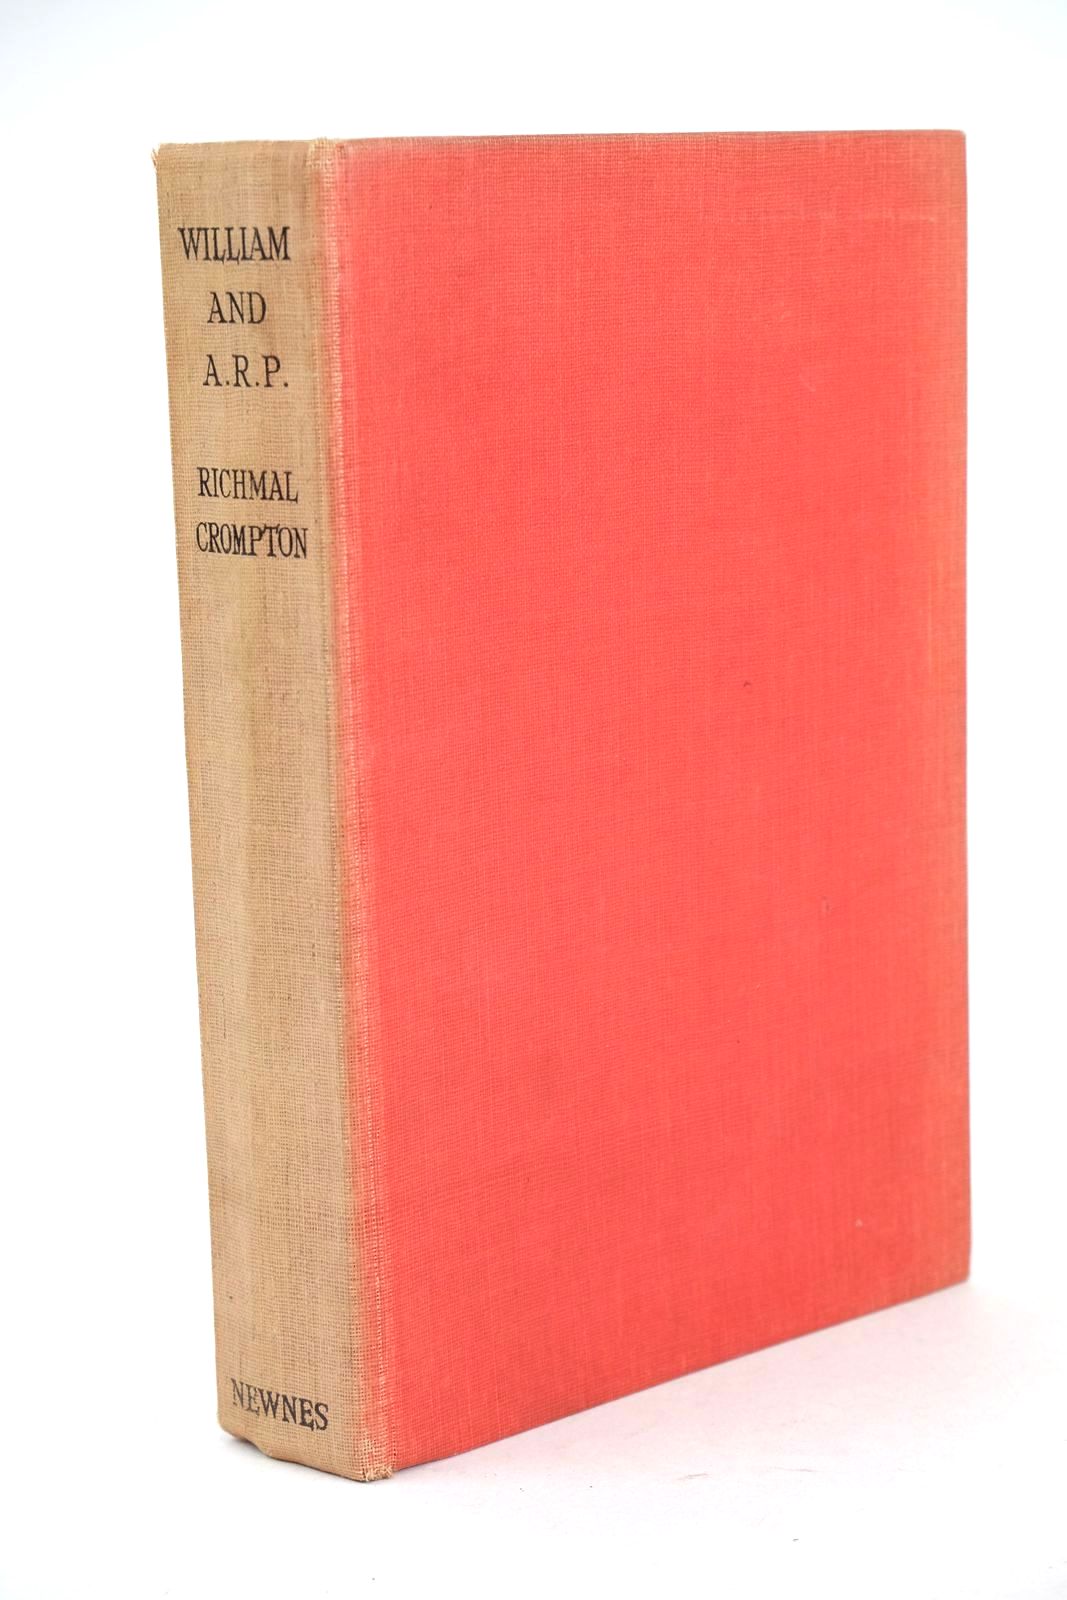 Photo of WILLIAM AND A.R.P. written by Crompton, Richmal illustrated by Henry, Thomas published by George Newnes Limited (STOCK CODE: 1326060)  for sale by Stella & Rose's Books